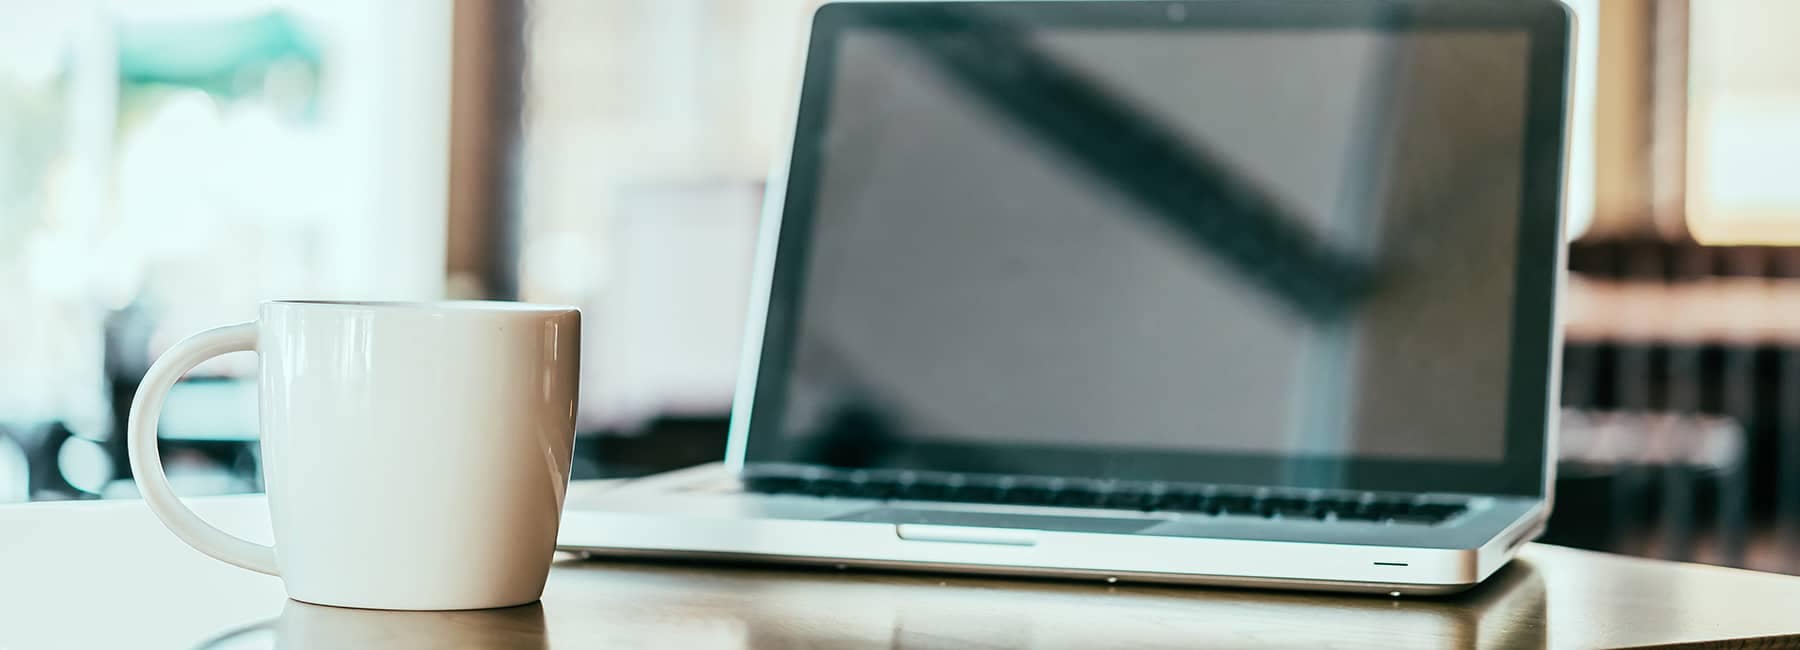 coffee cup and laptop on table